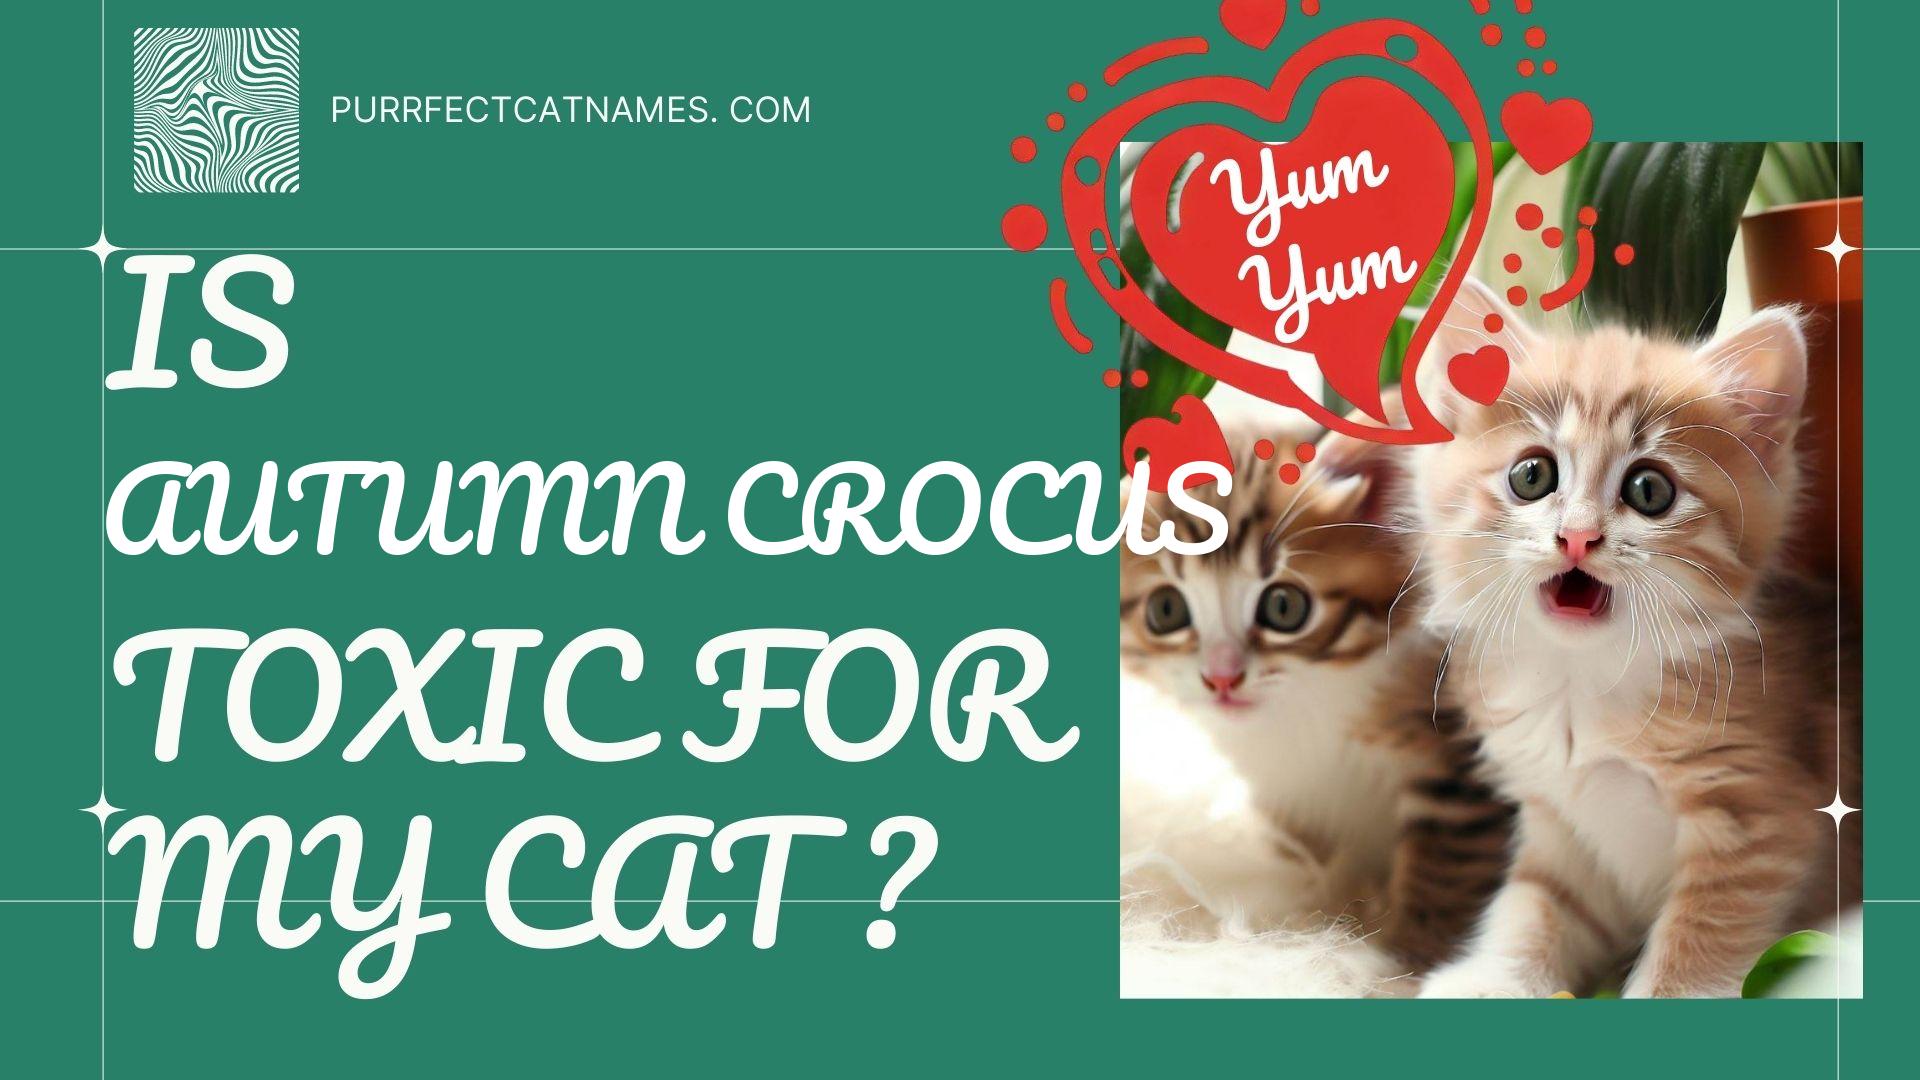 IsAutumn Crocus plant toxic for your cat